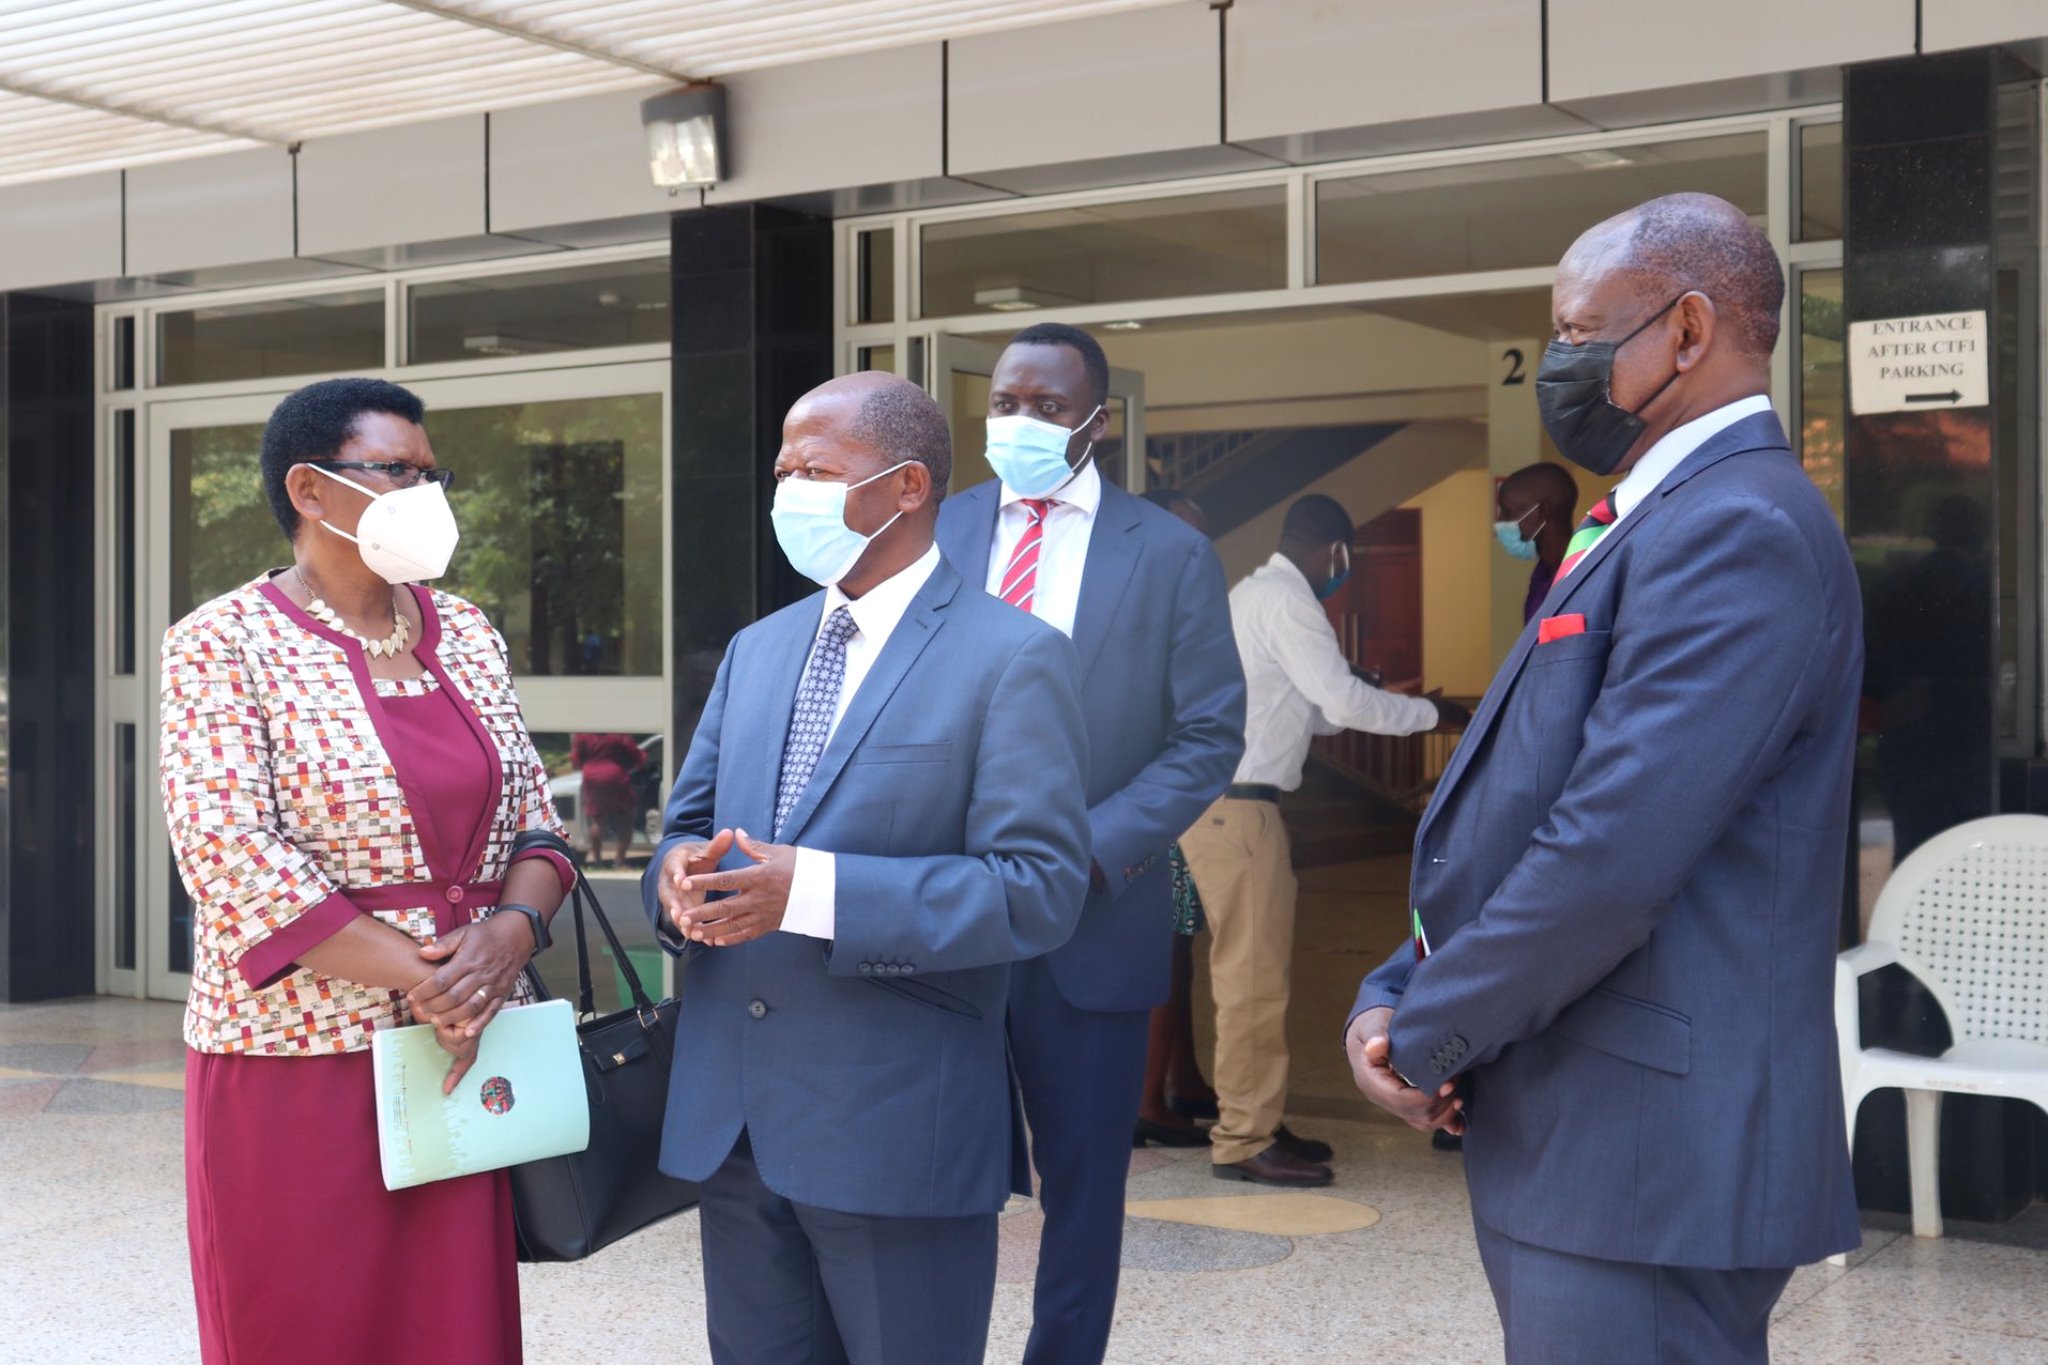 The State Minister for Higher Education-Hon. Dr. John Chrysostom Muyingo (C) chats with the Vice Chancellor-Prof. Barnabas Nawangwe (R) and Ms. Jolly Uzamukunda Karabaaya-Commissioner for Higher Education and Training during Day 1 of the 71st Graduation Ceremony, 17th May 2021, CTF1, Makerere University. Rear is Ag. University Secretary-Mr. Yusuf Kiranda.